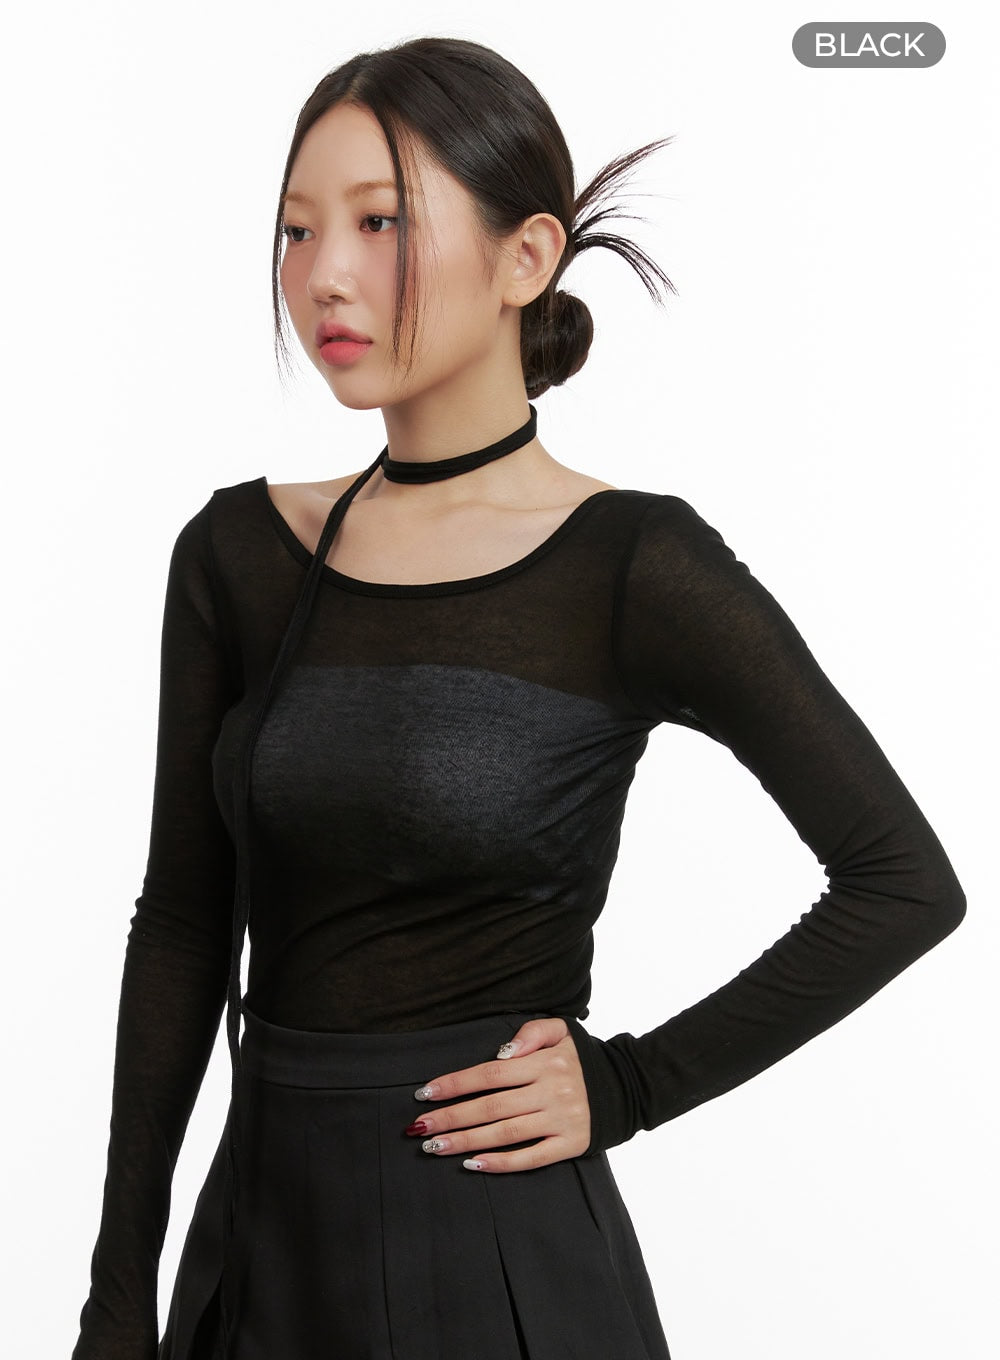 sheer-u-neck-top-with-scarf-ou403